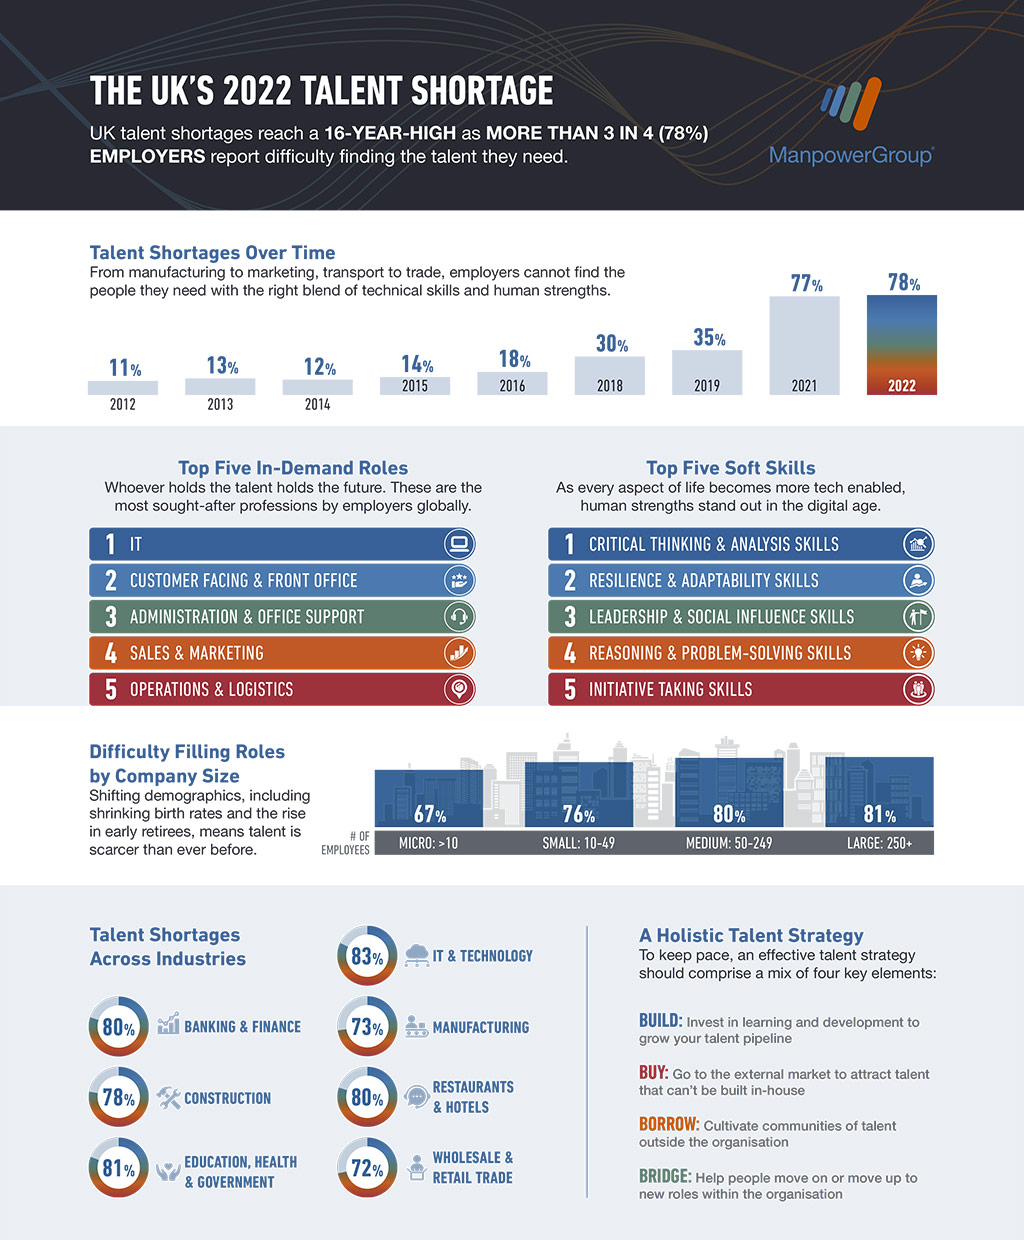 The Talent Shortage infographic